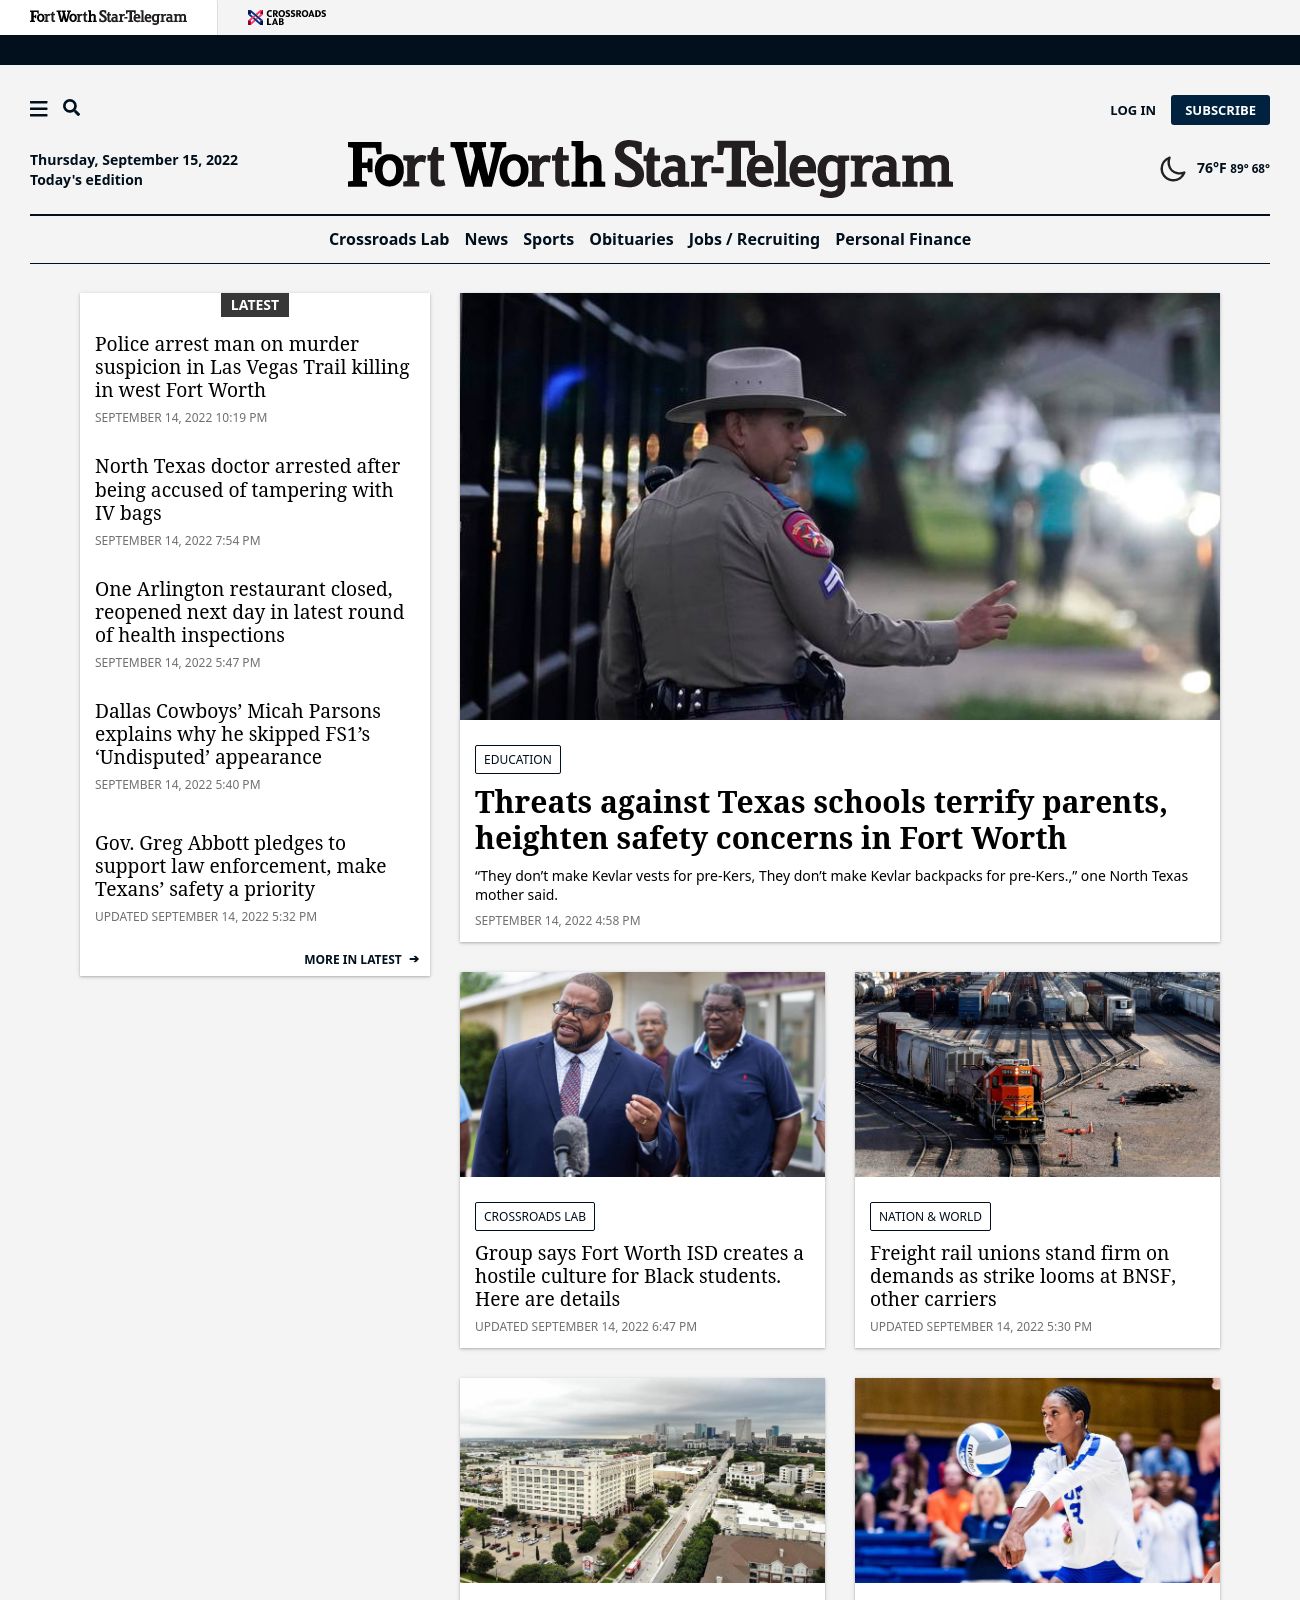 Fort Worth Star-Telegram at 2022-09-15 00:31:30-05:00 local time